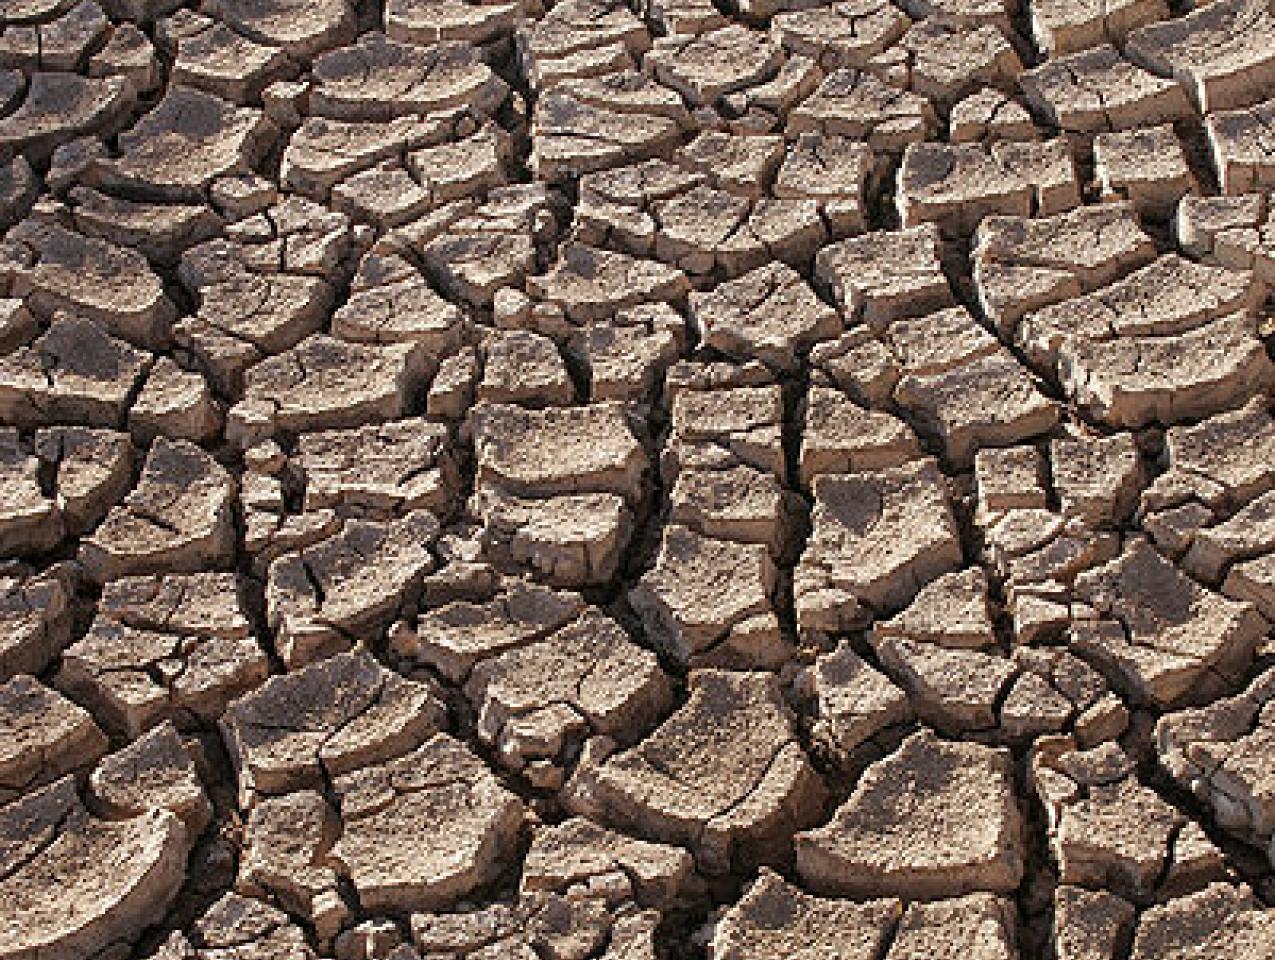 Dry ground in the Sonoran Desert, Sonora,Mexico